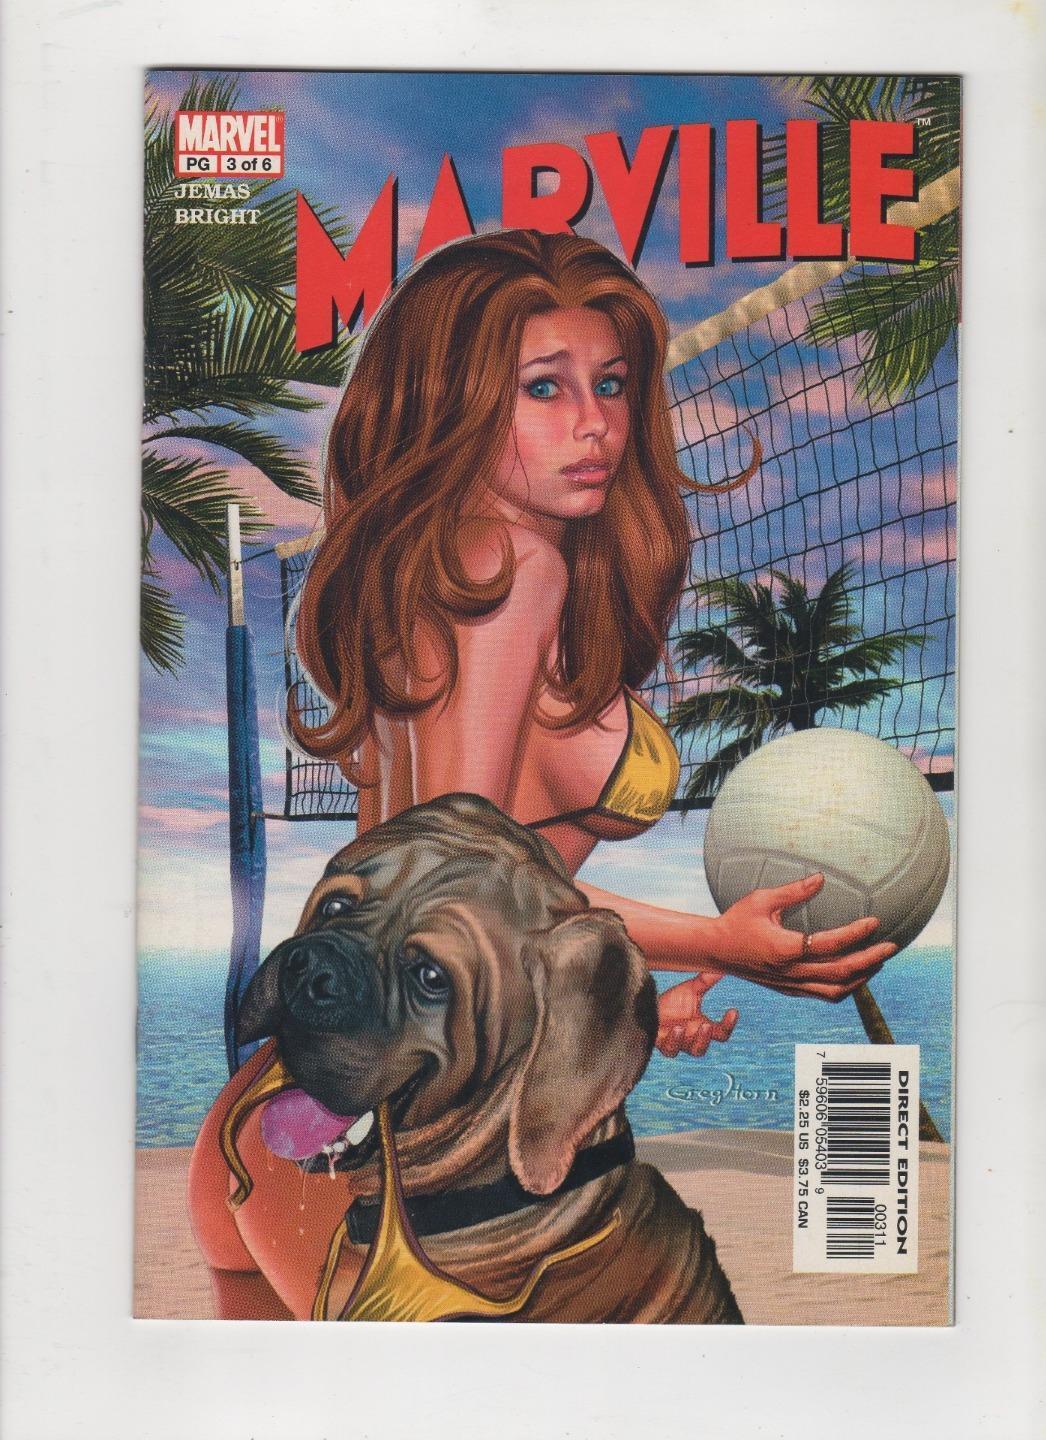 Marville #3, Greg Horn Cover, VF+ 8.5, 1st Print, 2003, See Scans